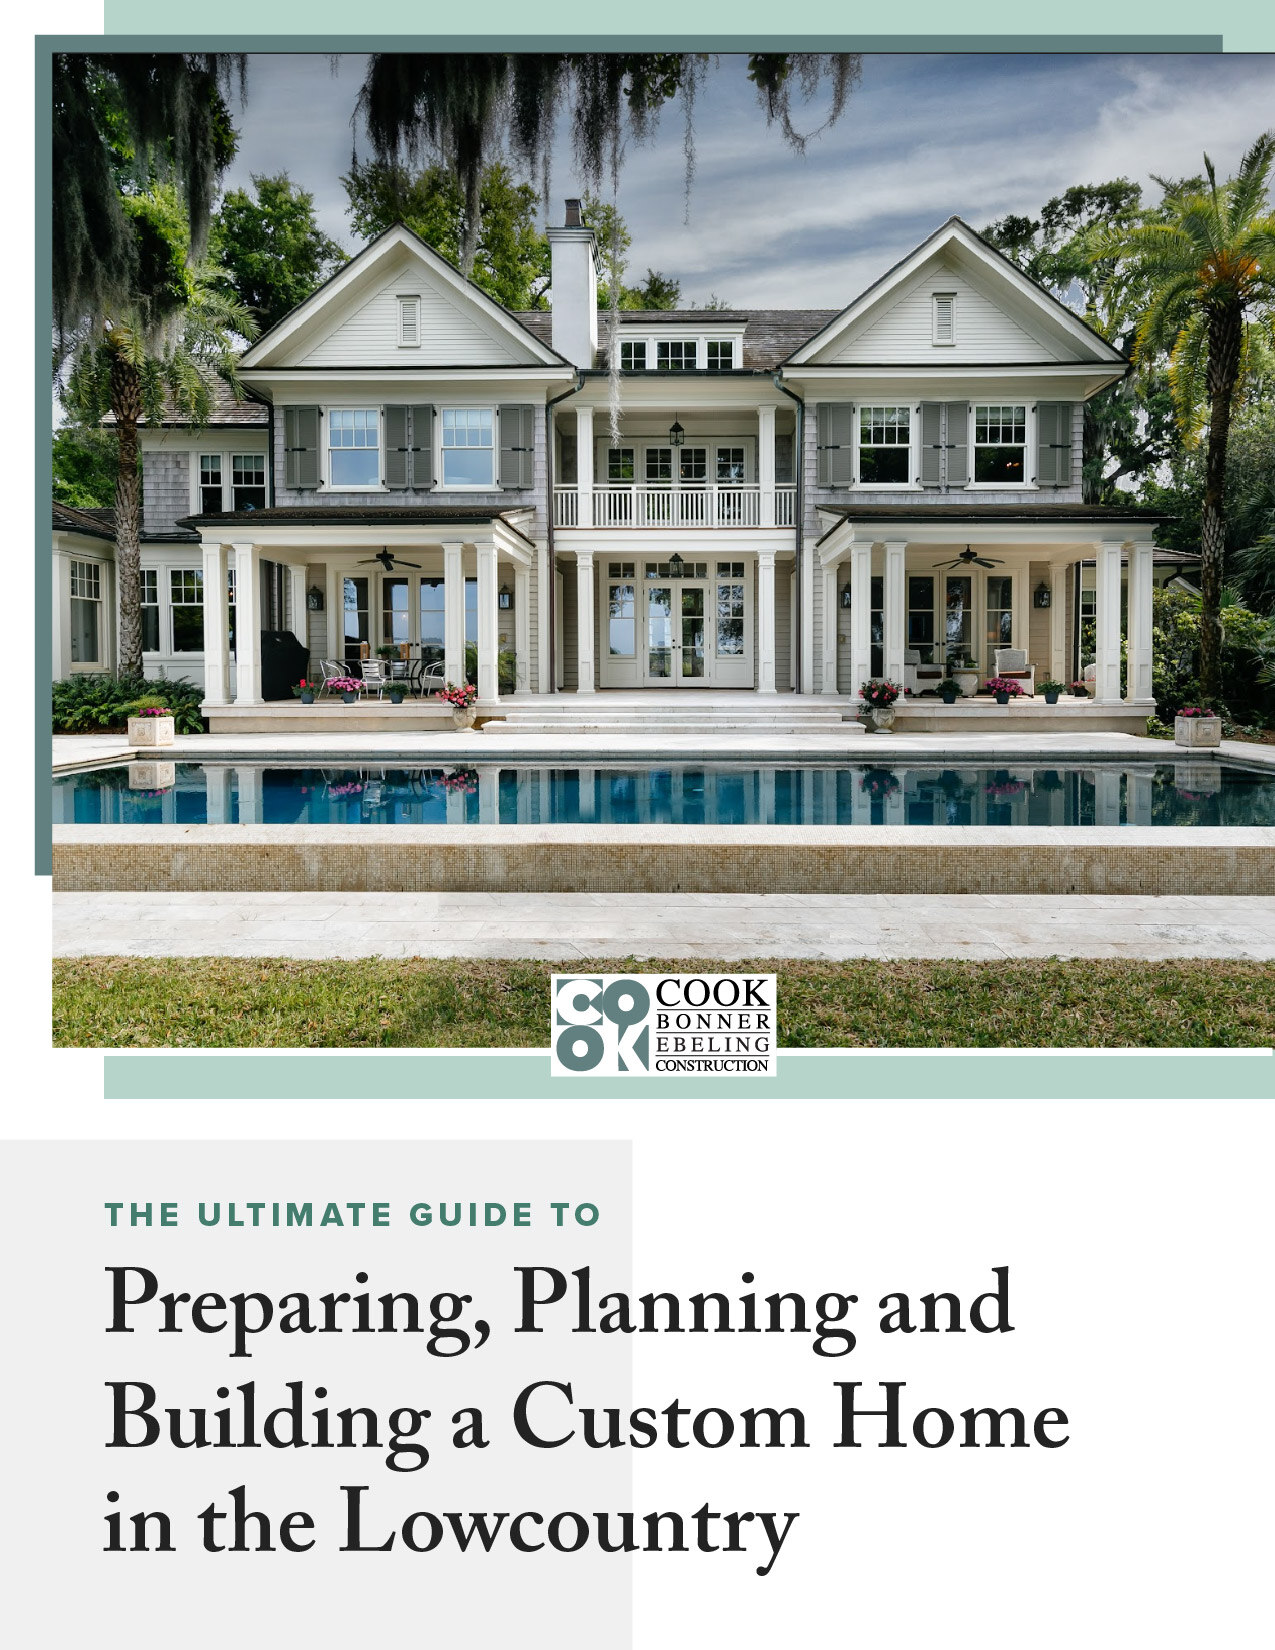 The Ultimate Guide to Preparing, Planning and Building a Custom Home in the Lowcountry